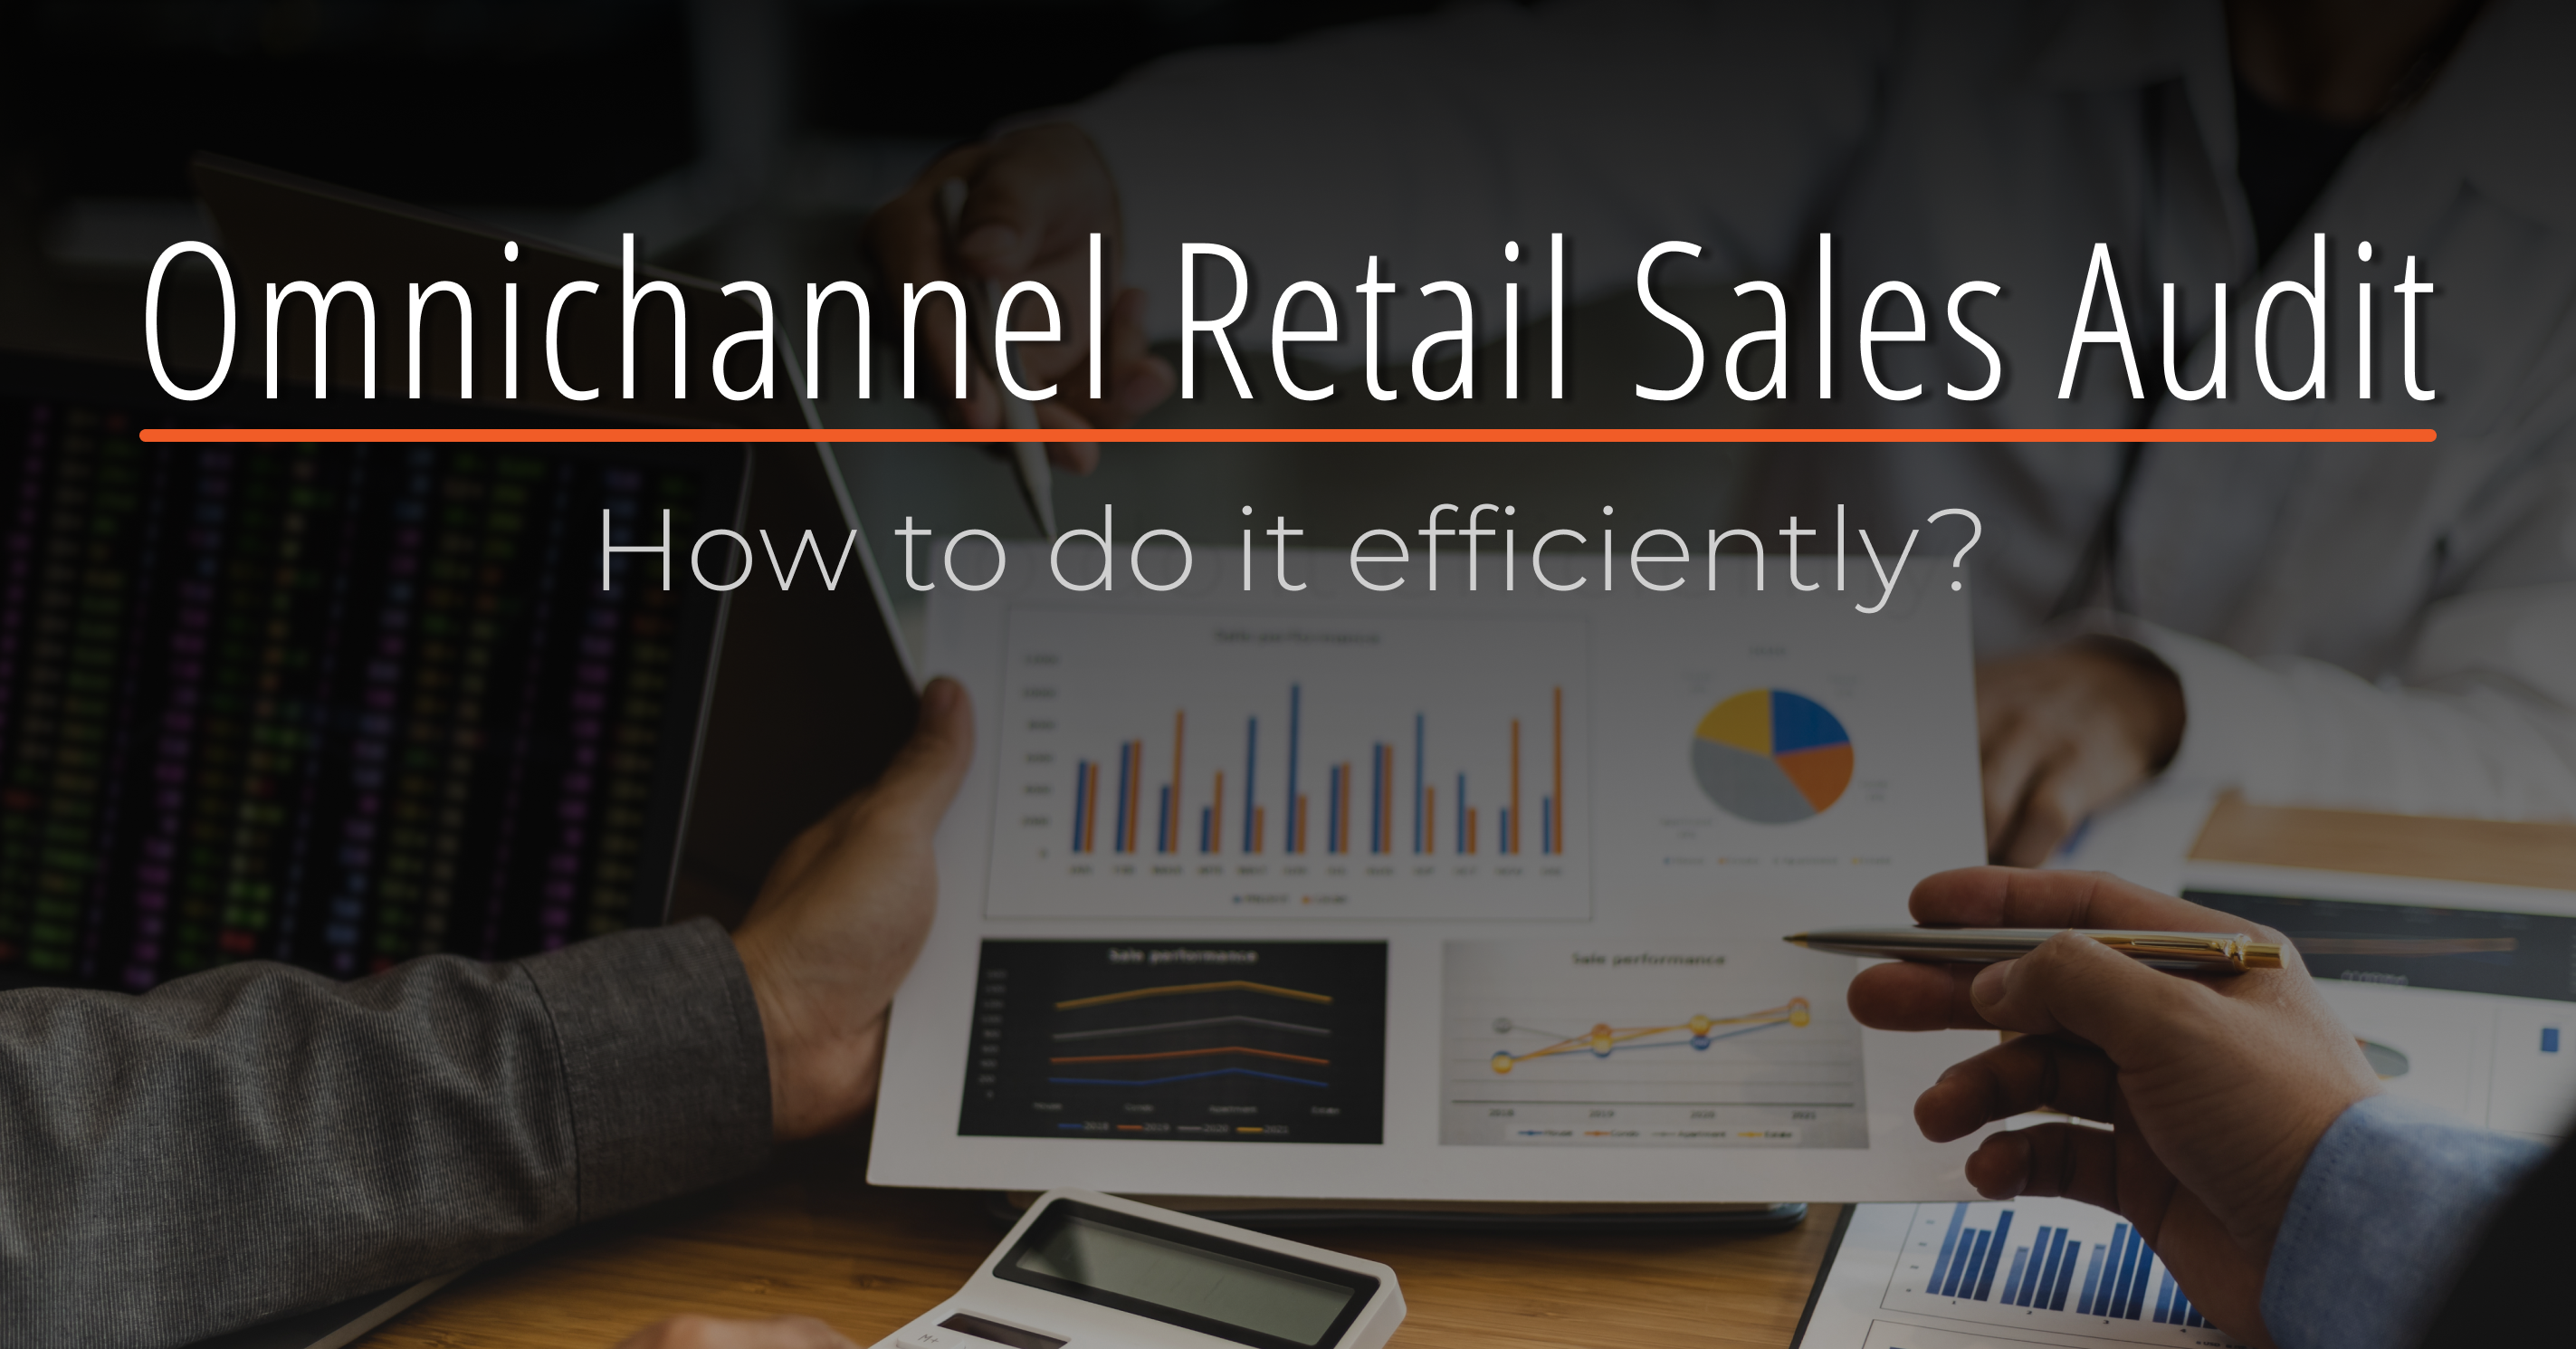 Omnichannel Retail Sales Audit and How to Do It Efficiently